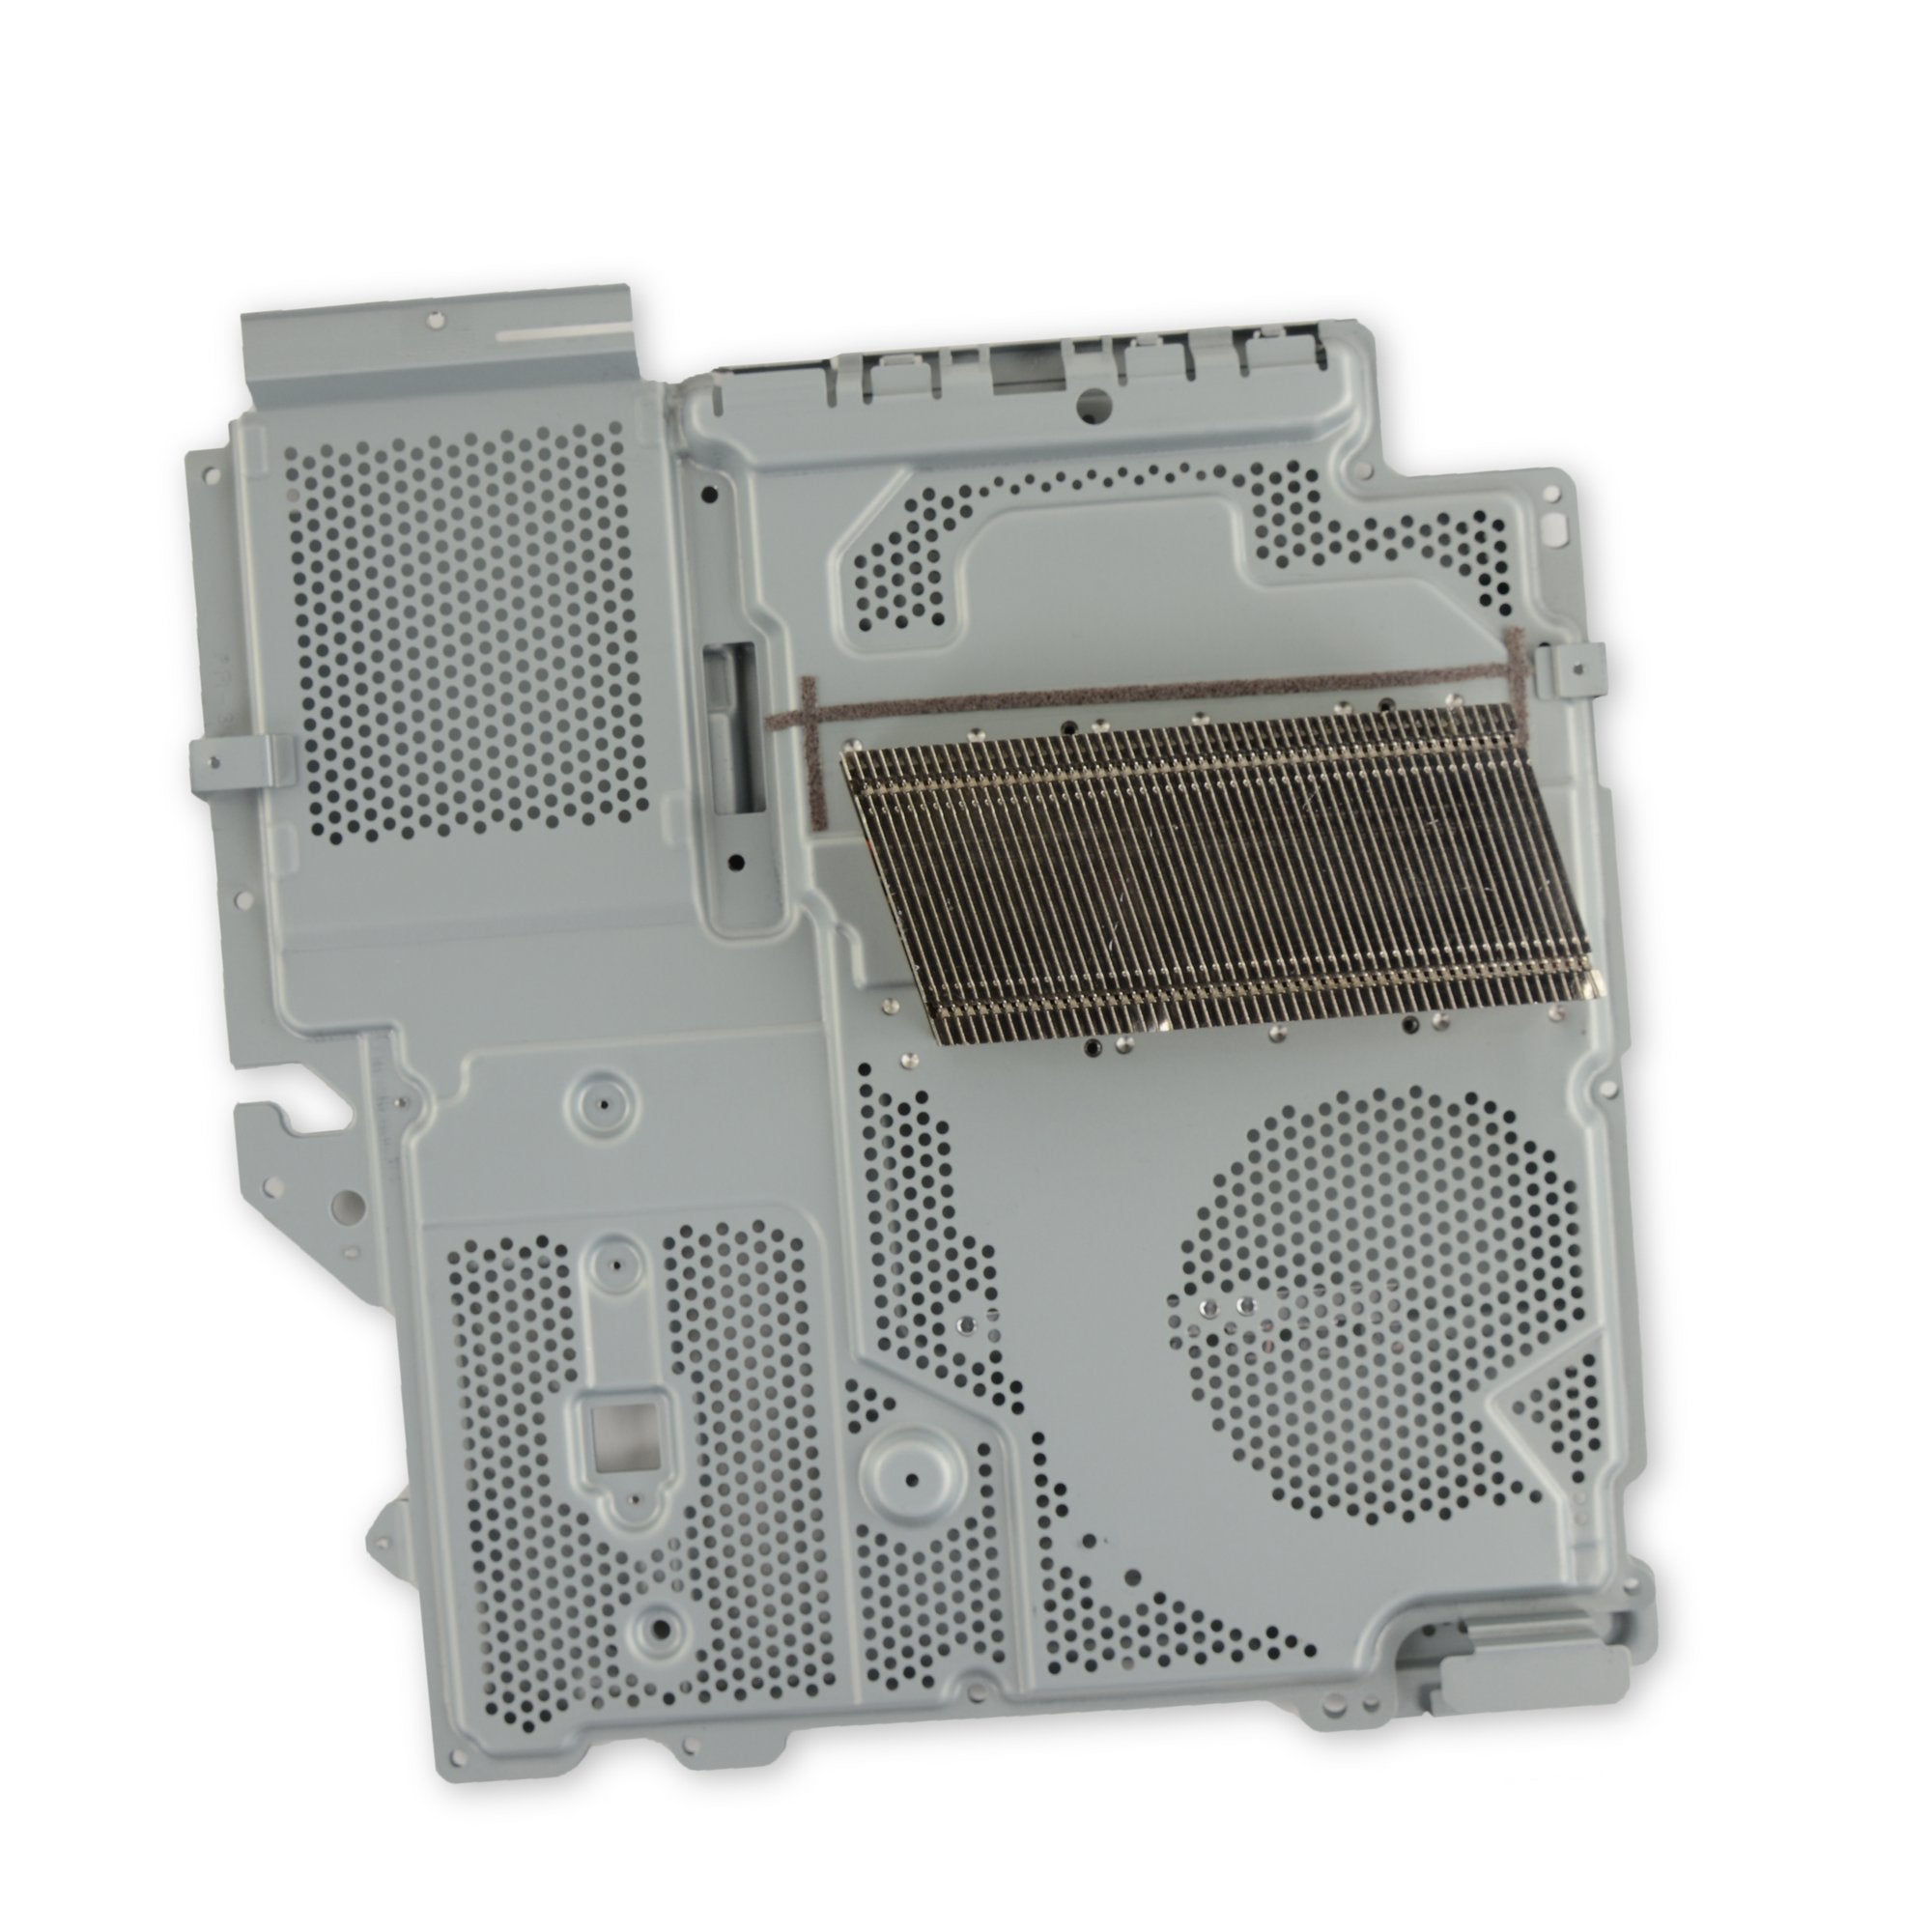 PlayStation 4 Pro Heat Sink and Chassis Plates